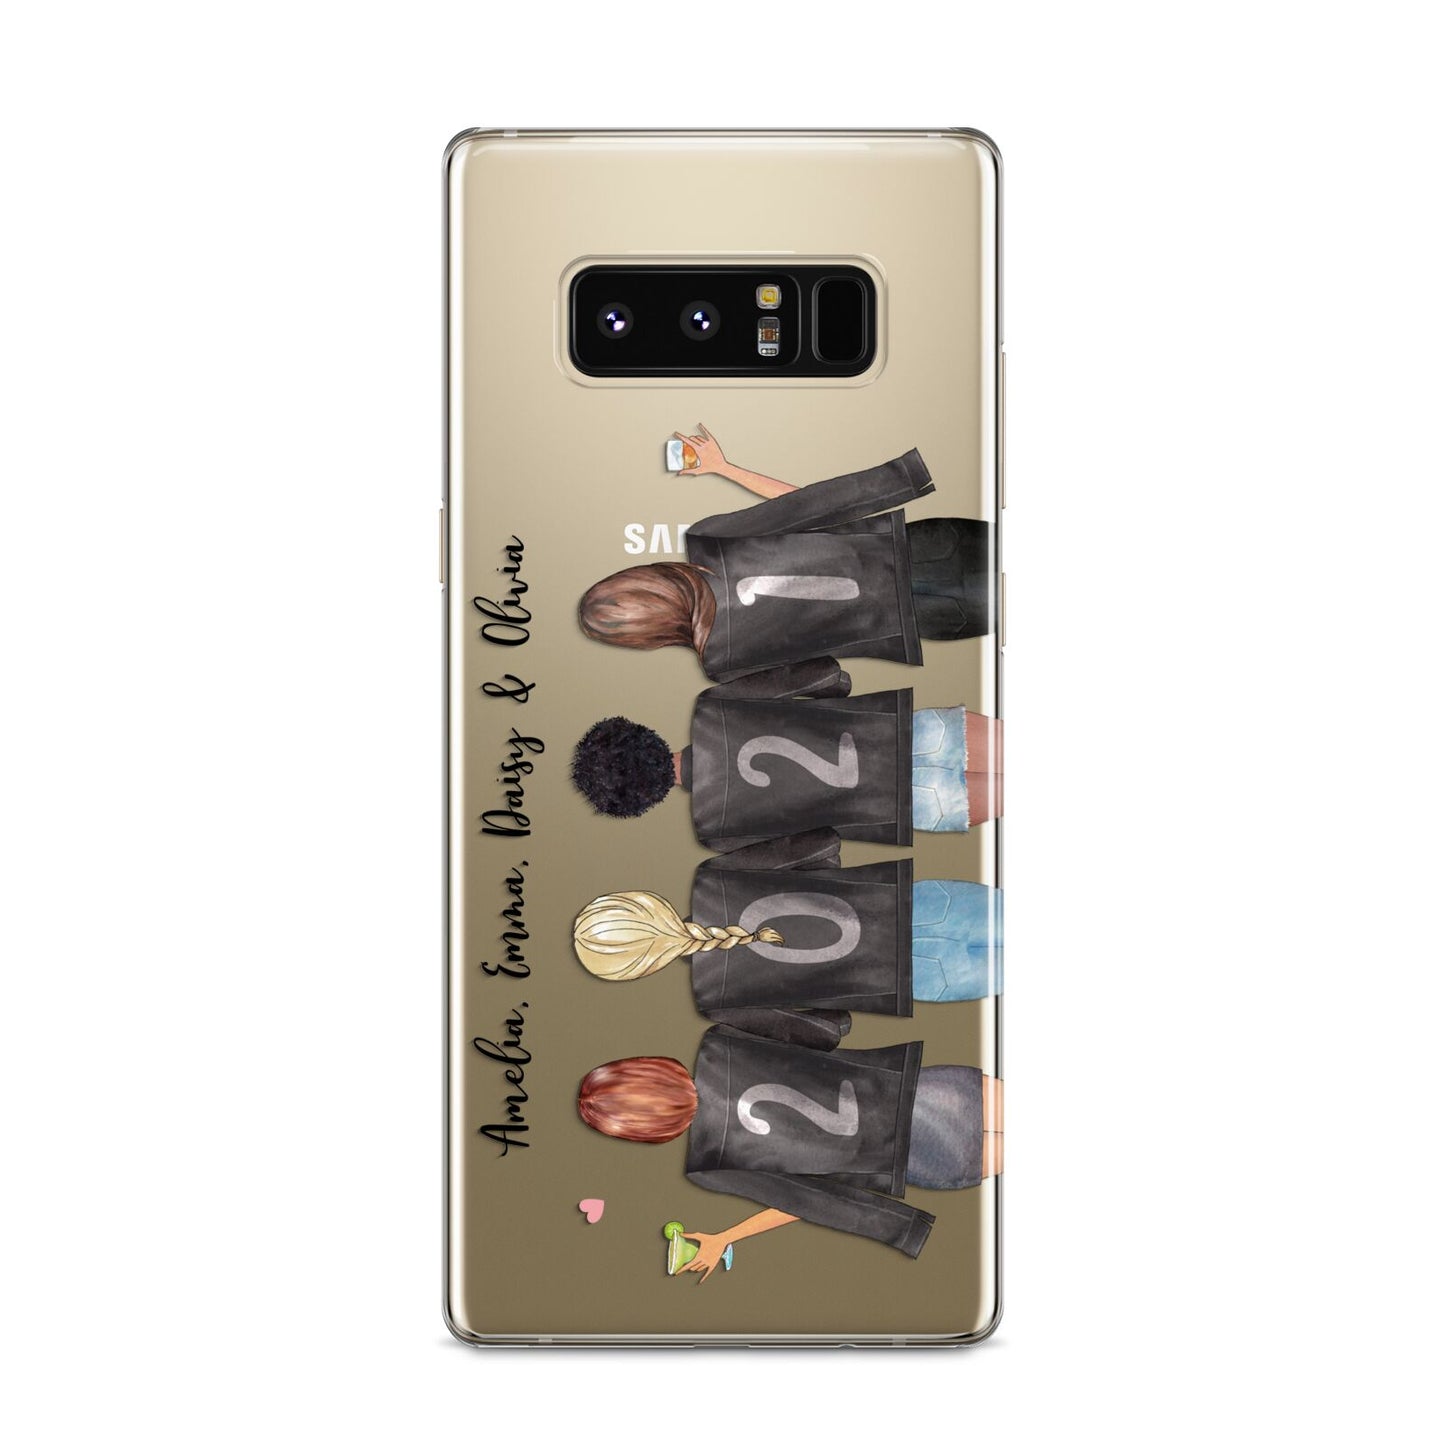 4 Best Friends with Names Samsung Galaxy S8 Case